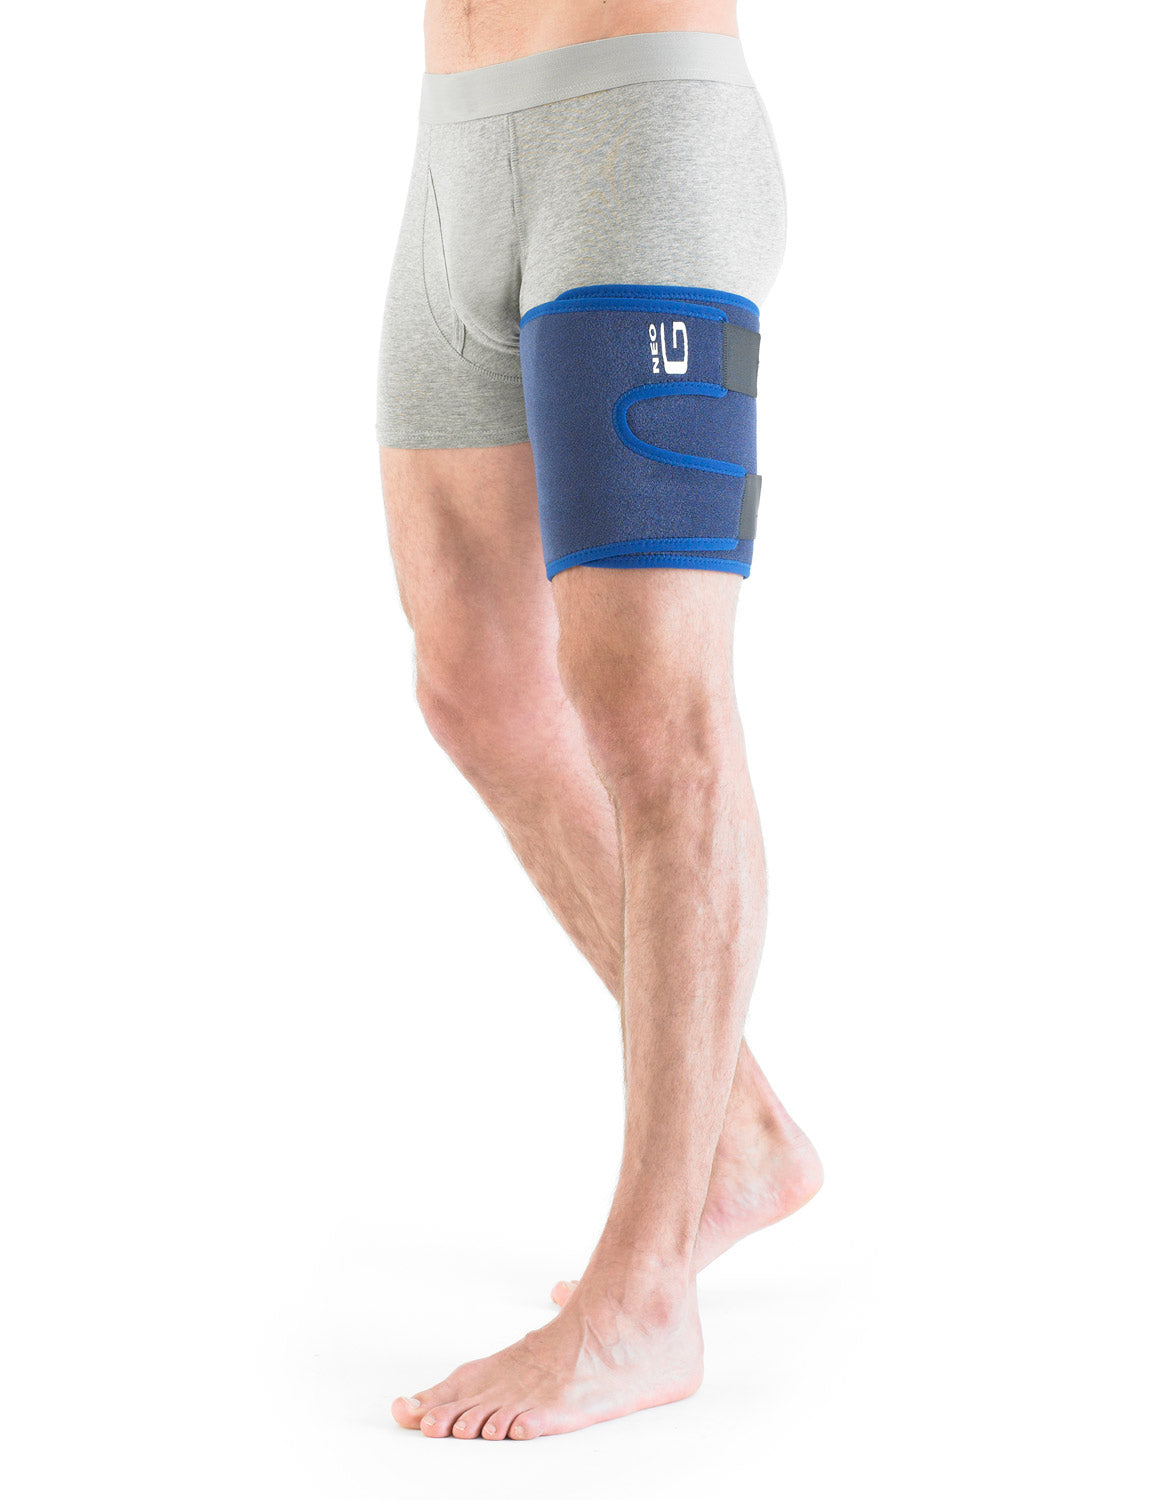 Ccdes Adjustable Wrap,Thigh Brace Support for Hamstring Quad